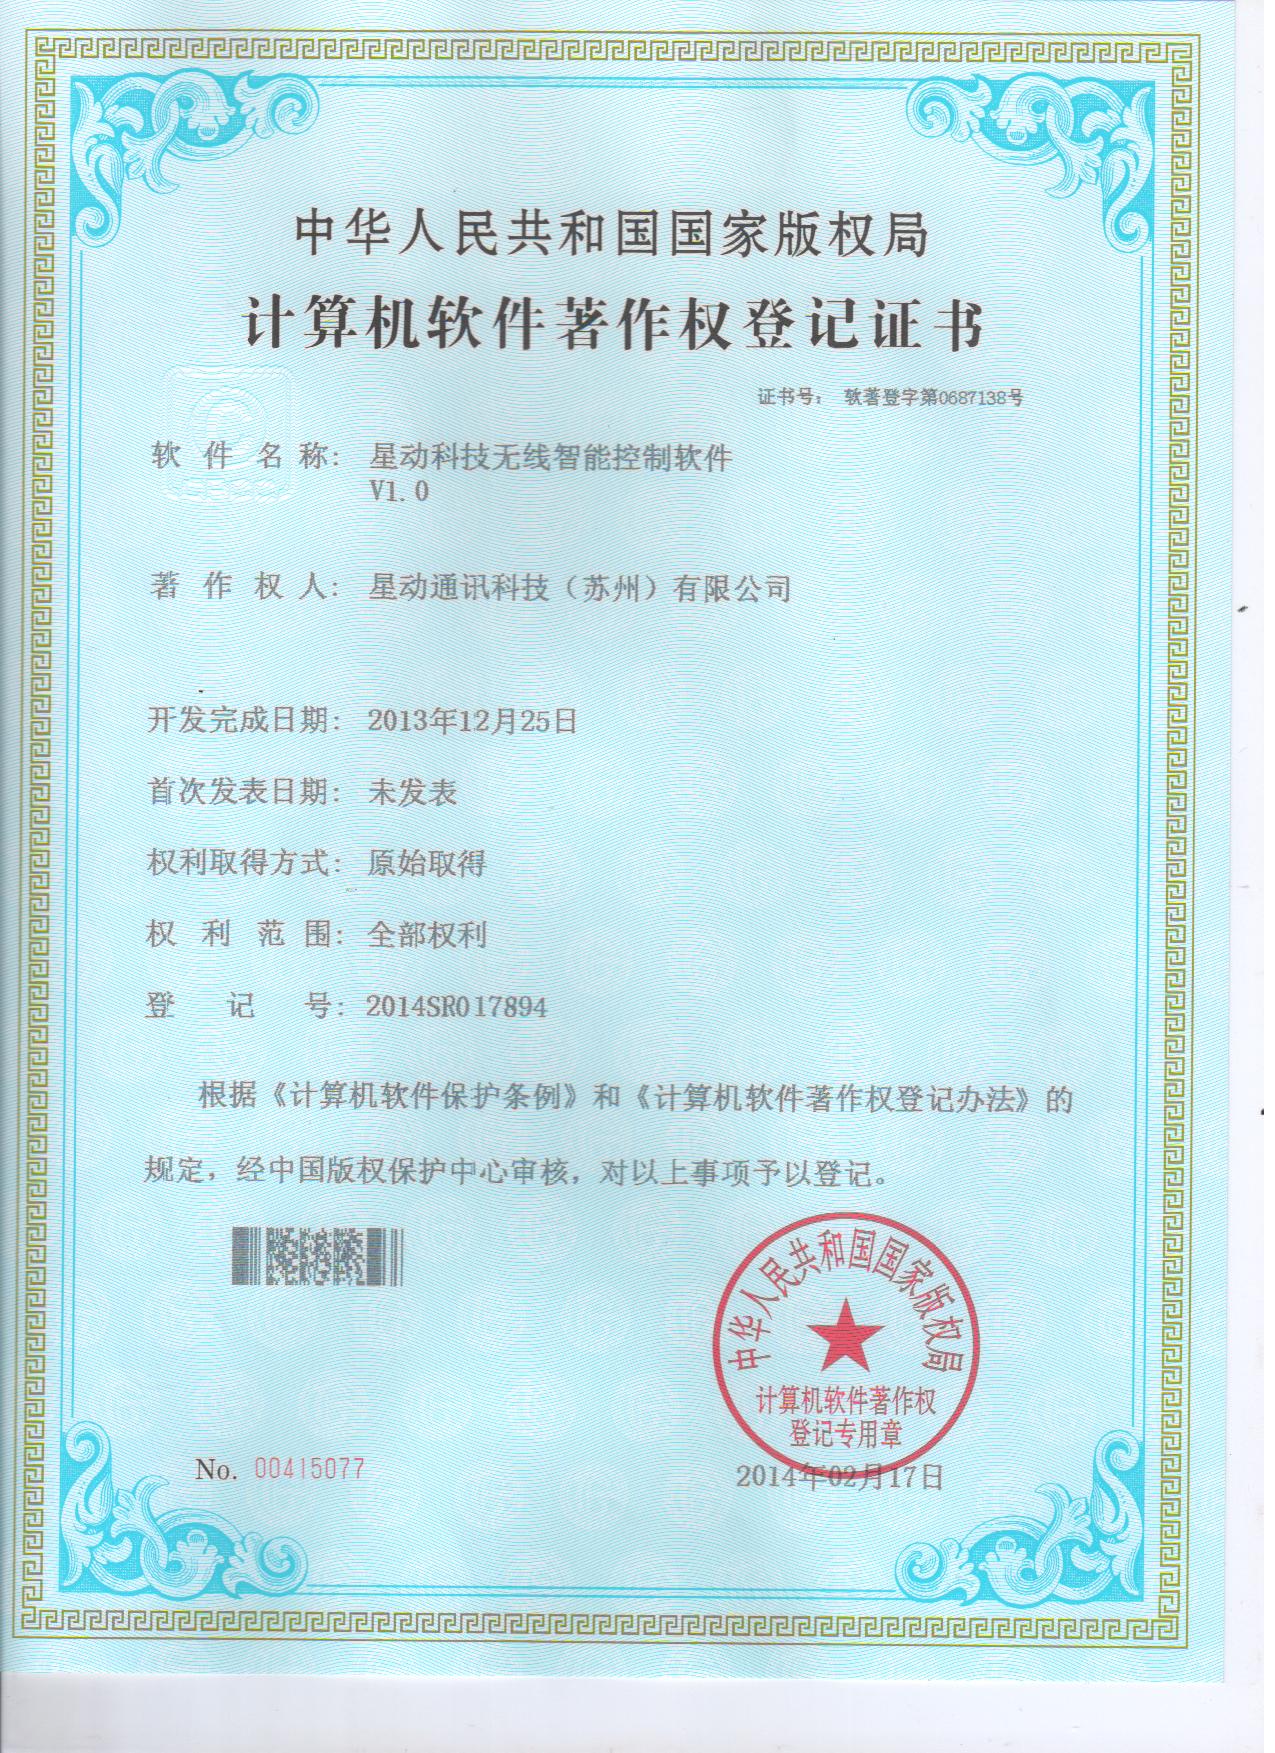 The Copyright certificate of computer software